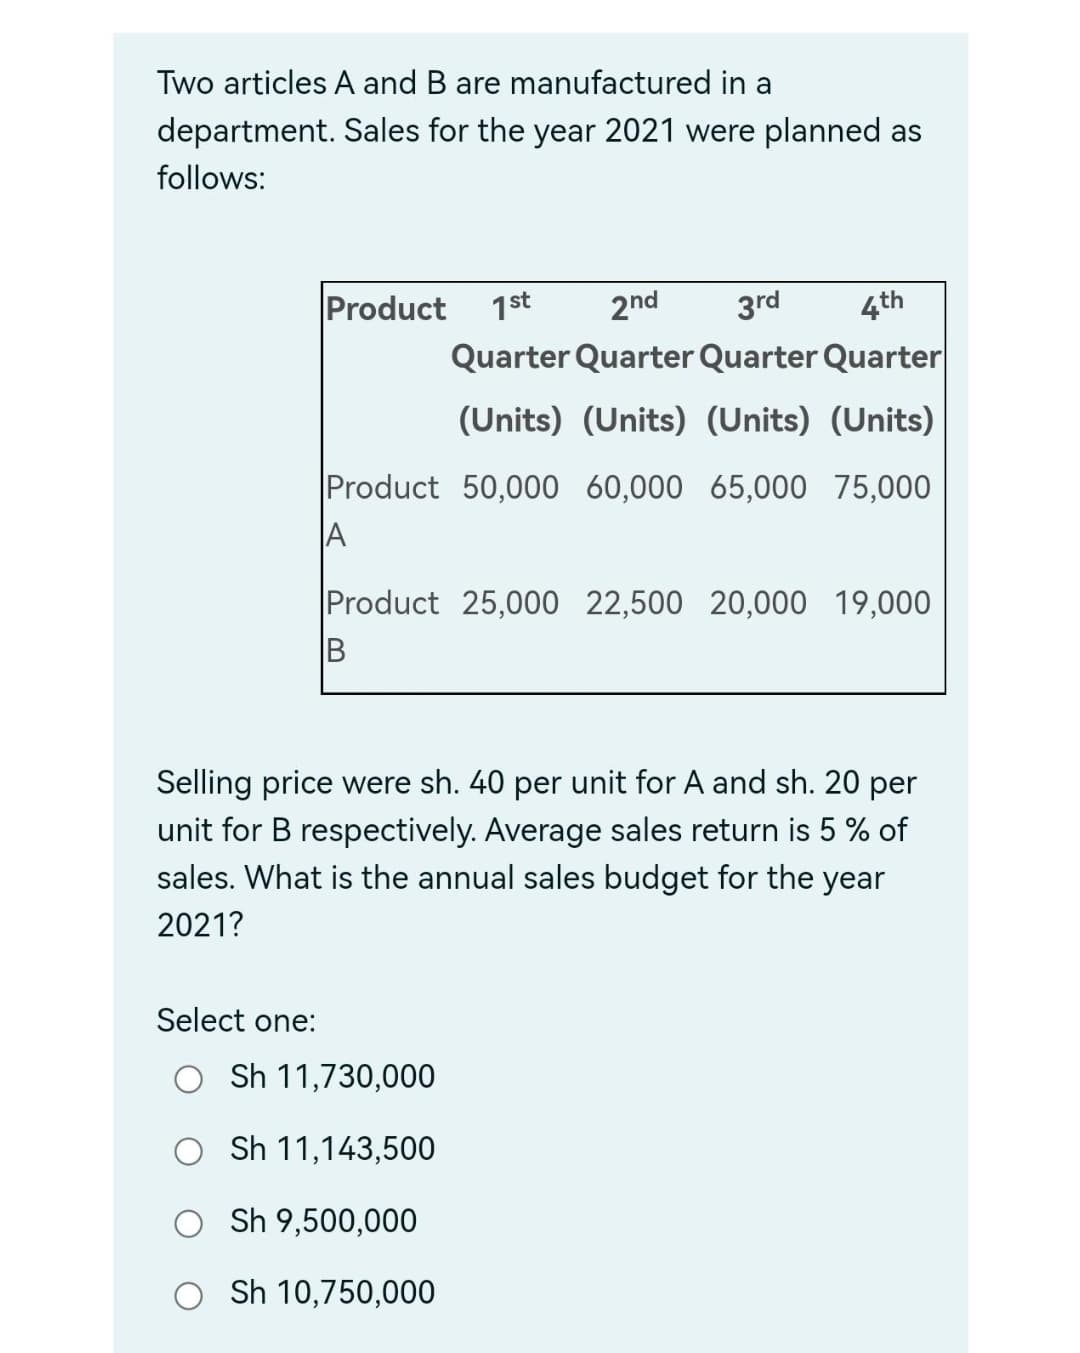 Two articles A and B are manufactured in a
department. Sales for the year 2021 were planned as
follows:
Product
1st
2nd
3rd
4th
Quarter Quarter Quarter Quarter
(Units) (Units) (Units) (Units)
Product 50,000 60,000 65,000 75,000
A
Product 25,000 22,500 20,000 19,000
B
Selling price were sh. 40 per unit for A and sh. 20 per
unit for B respectively. Average sales return is 5 % of
sales. What is the annual sales budget for the year
2021?
Select one:
Sh 11,730,000
O Sh 11,143,500
Sh 9,500,000
O Sh 10,750,000
